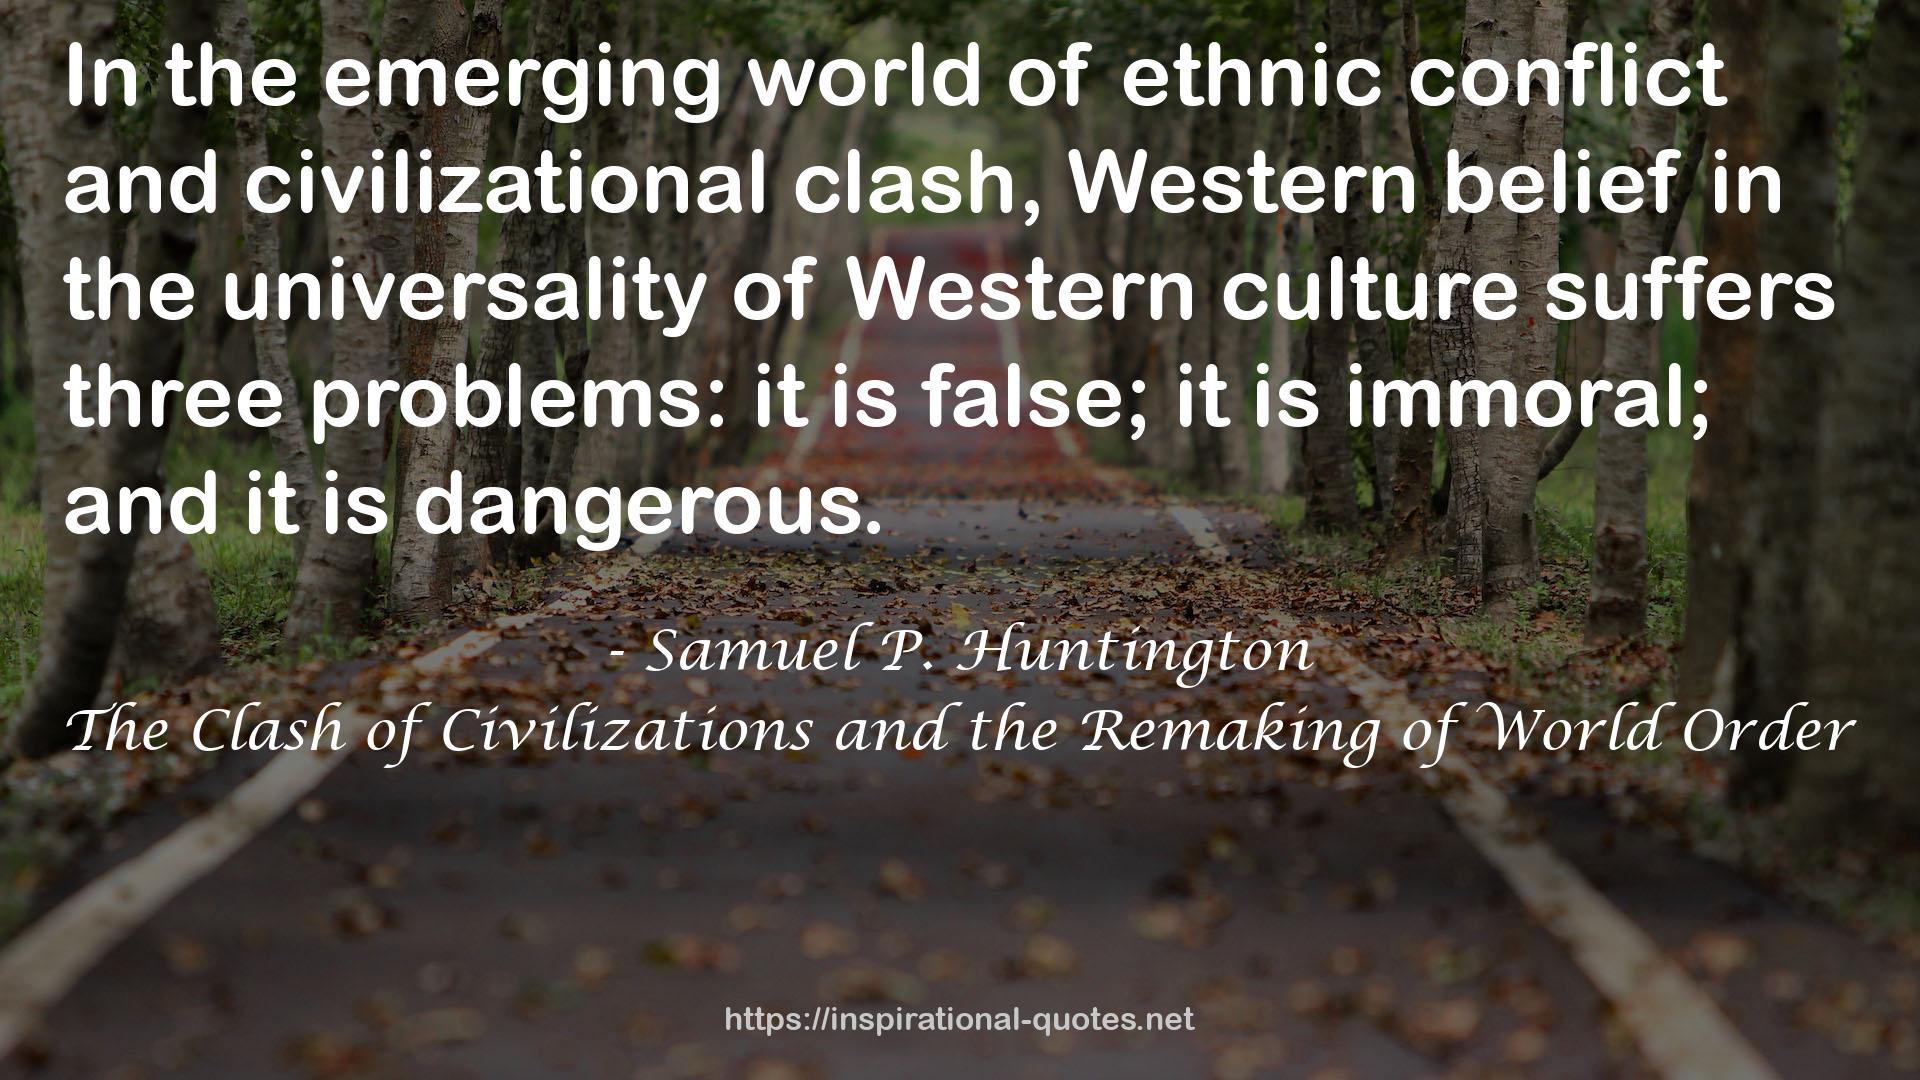 The Clash of Civilizations and the Remaking of World Order QUOTES